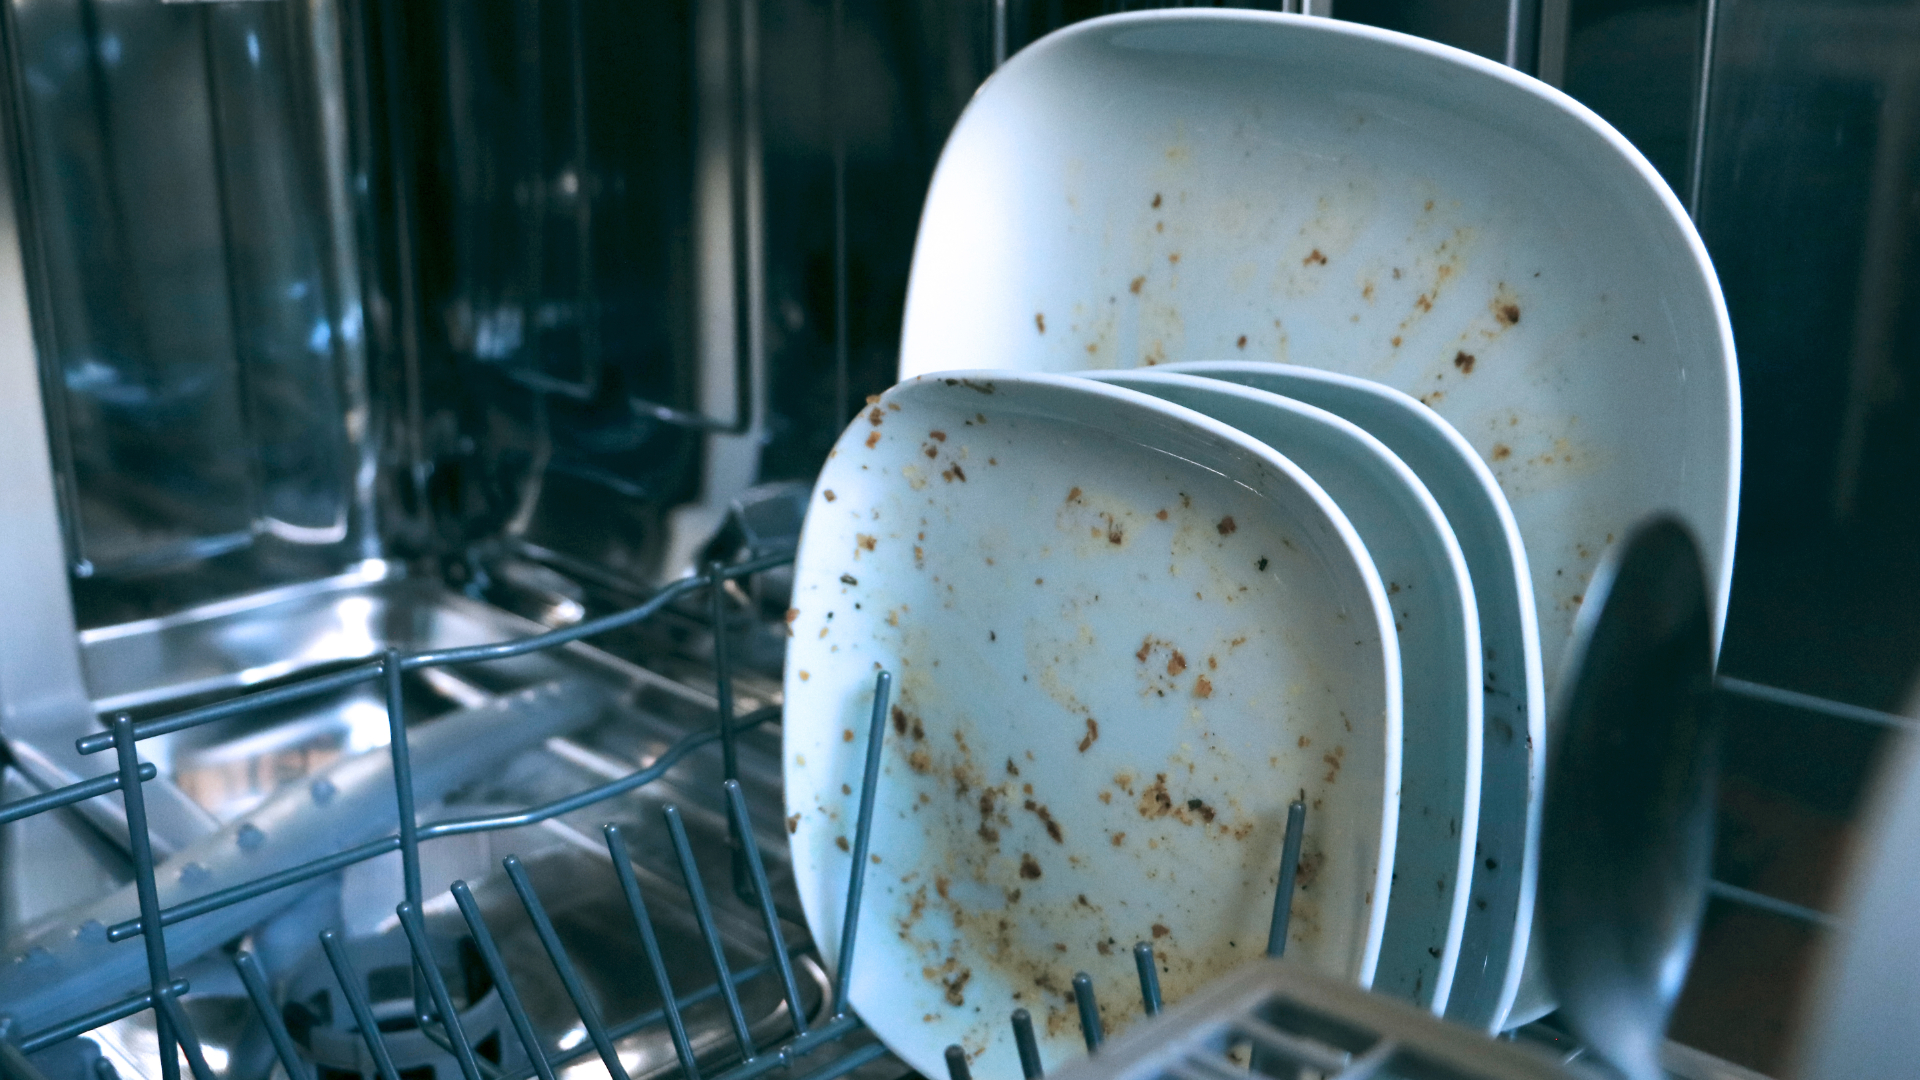 Featured image for “5 Reasons Your Dishwasher Smells Bad”